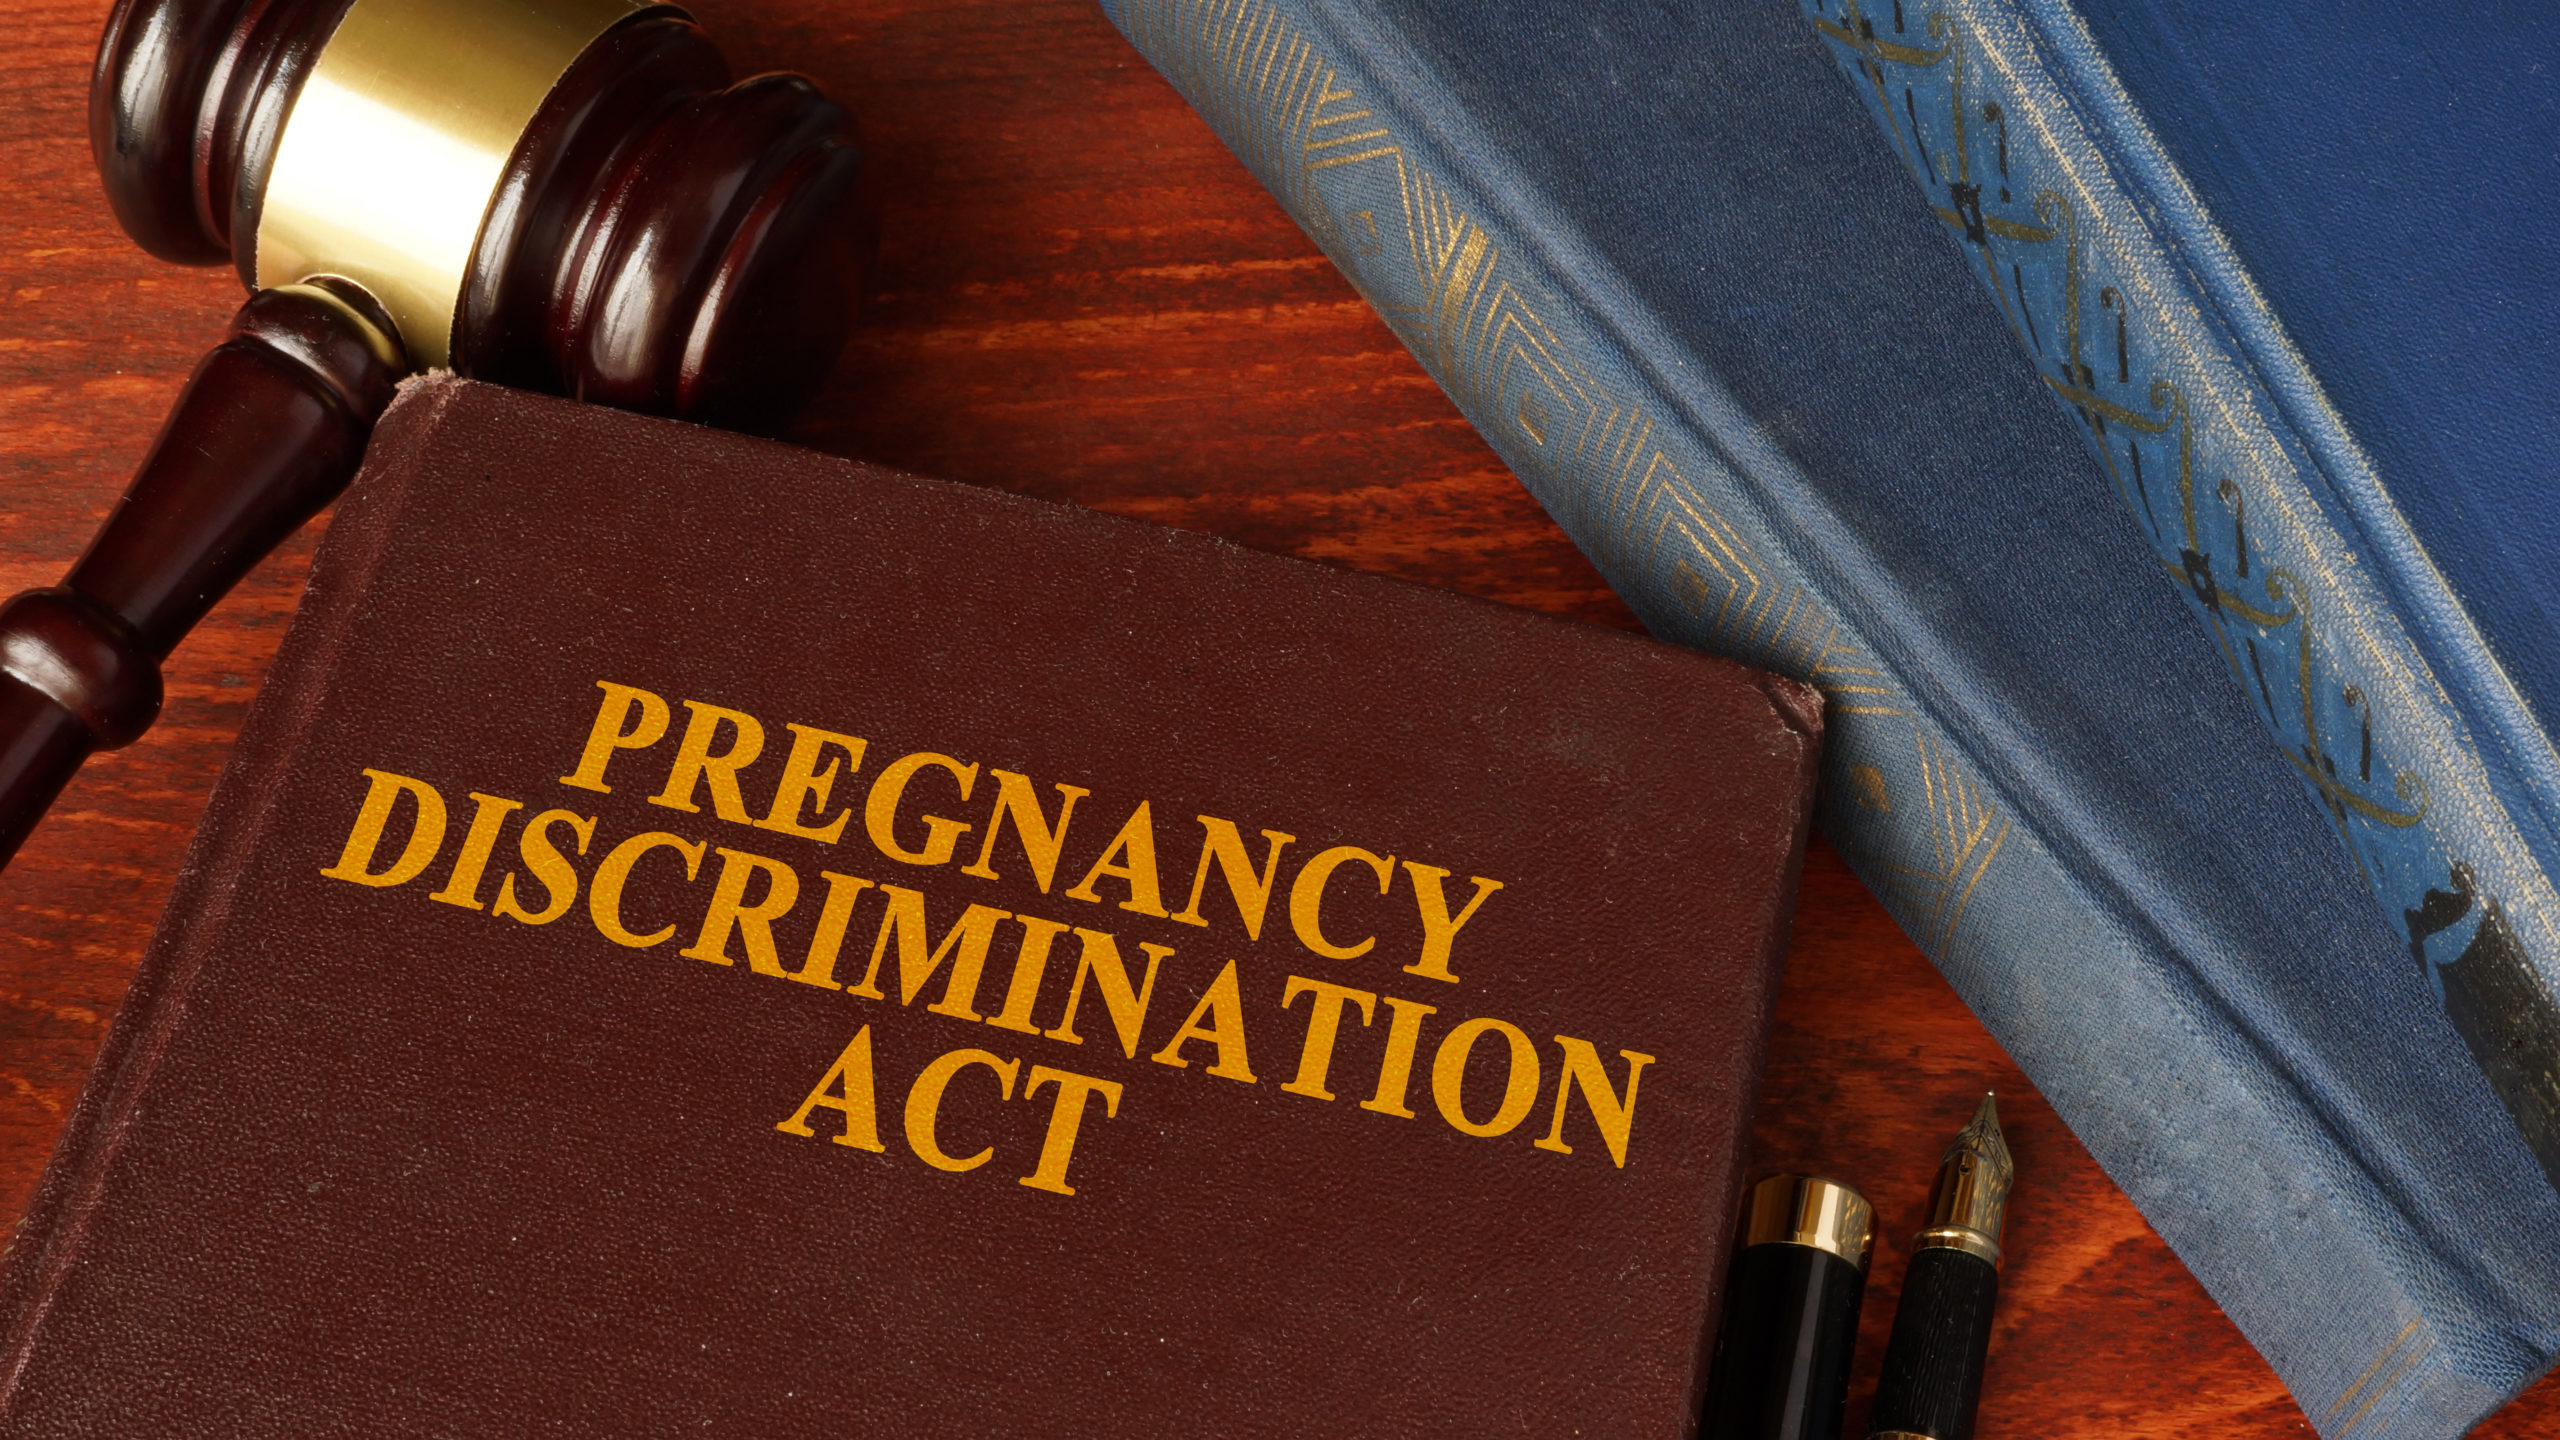 Pregnant–Know your rights!